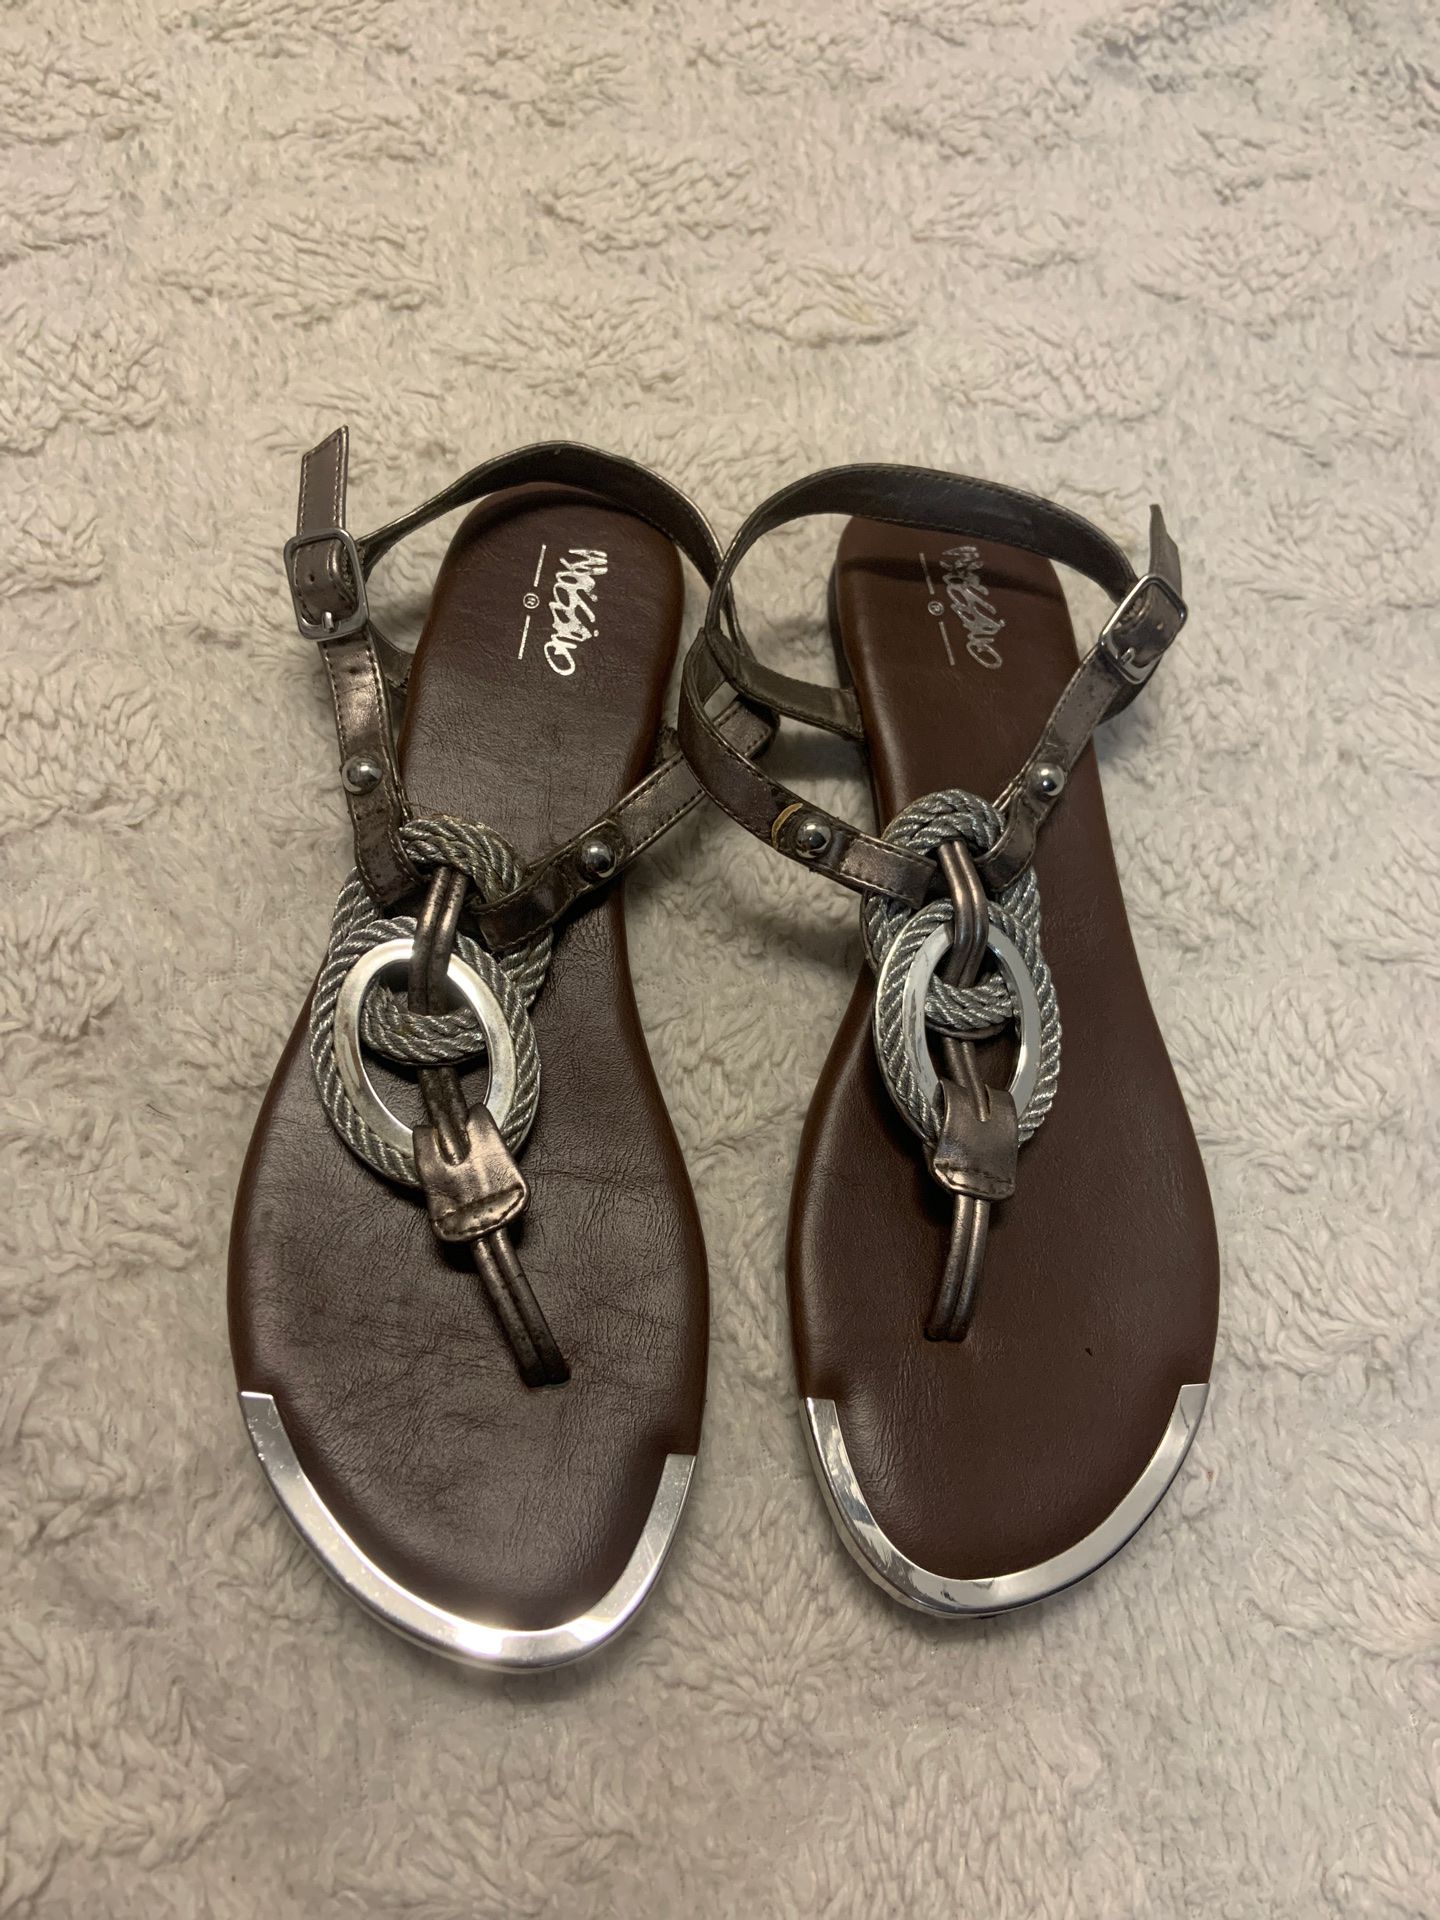 Like new mossimo sandals size 8 they fit as 7.5